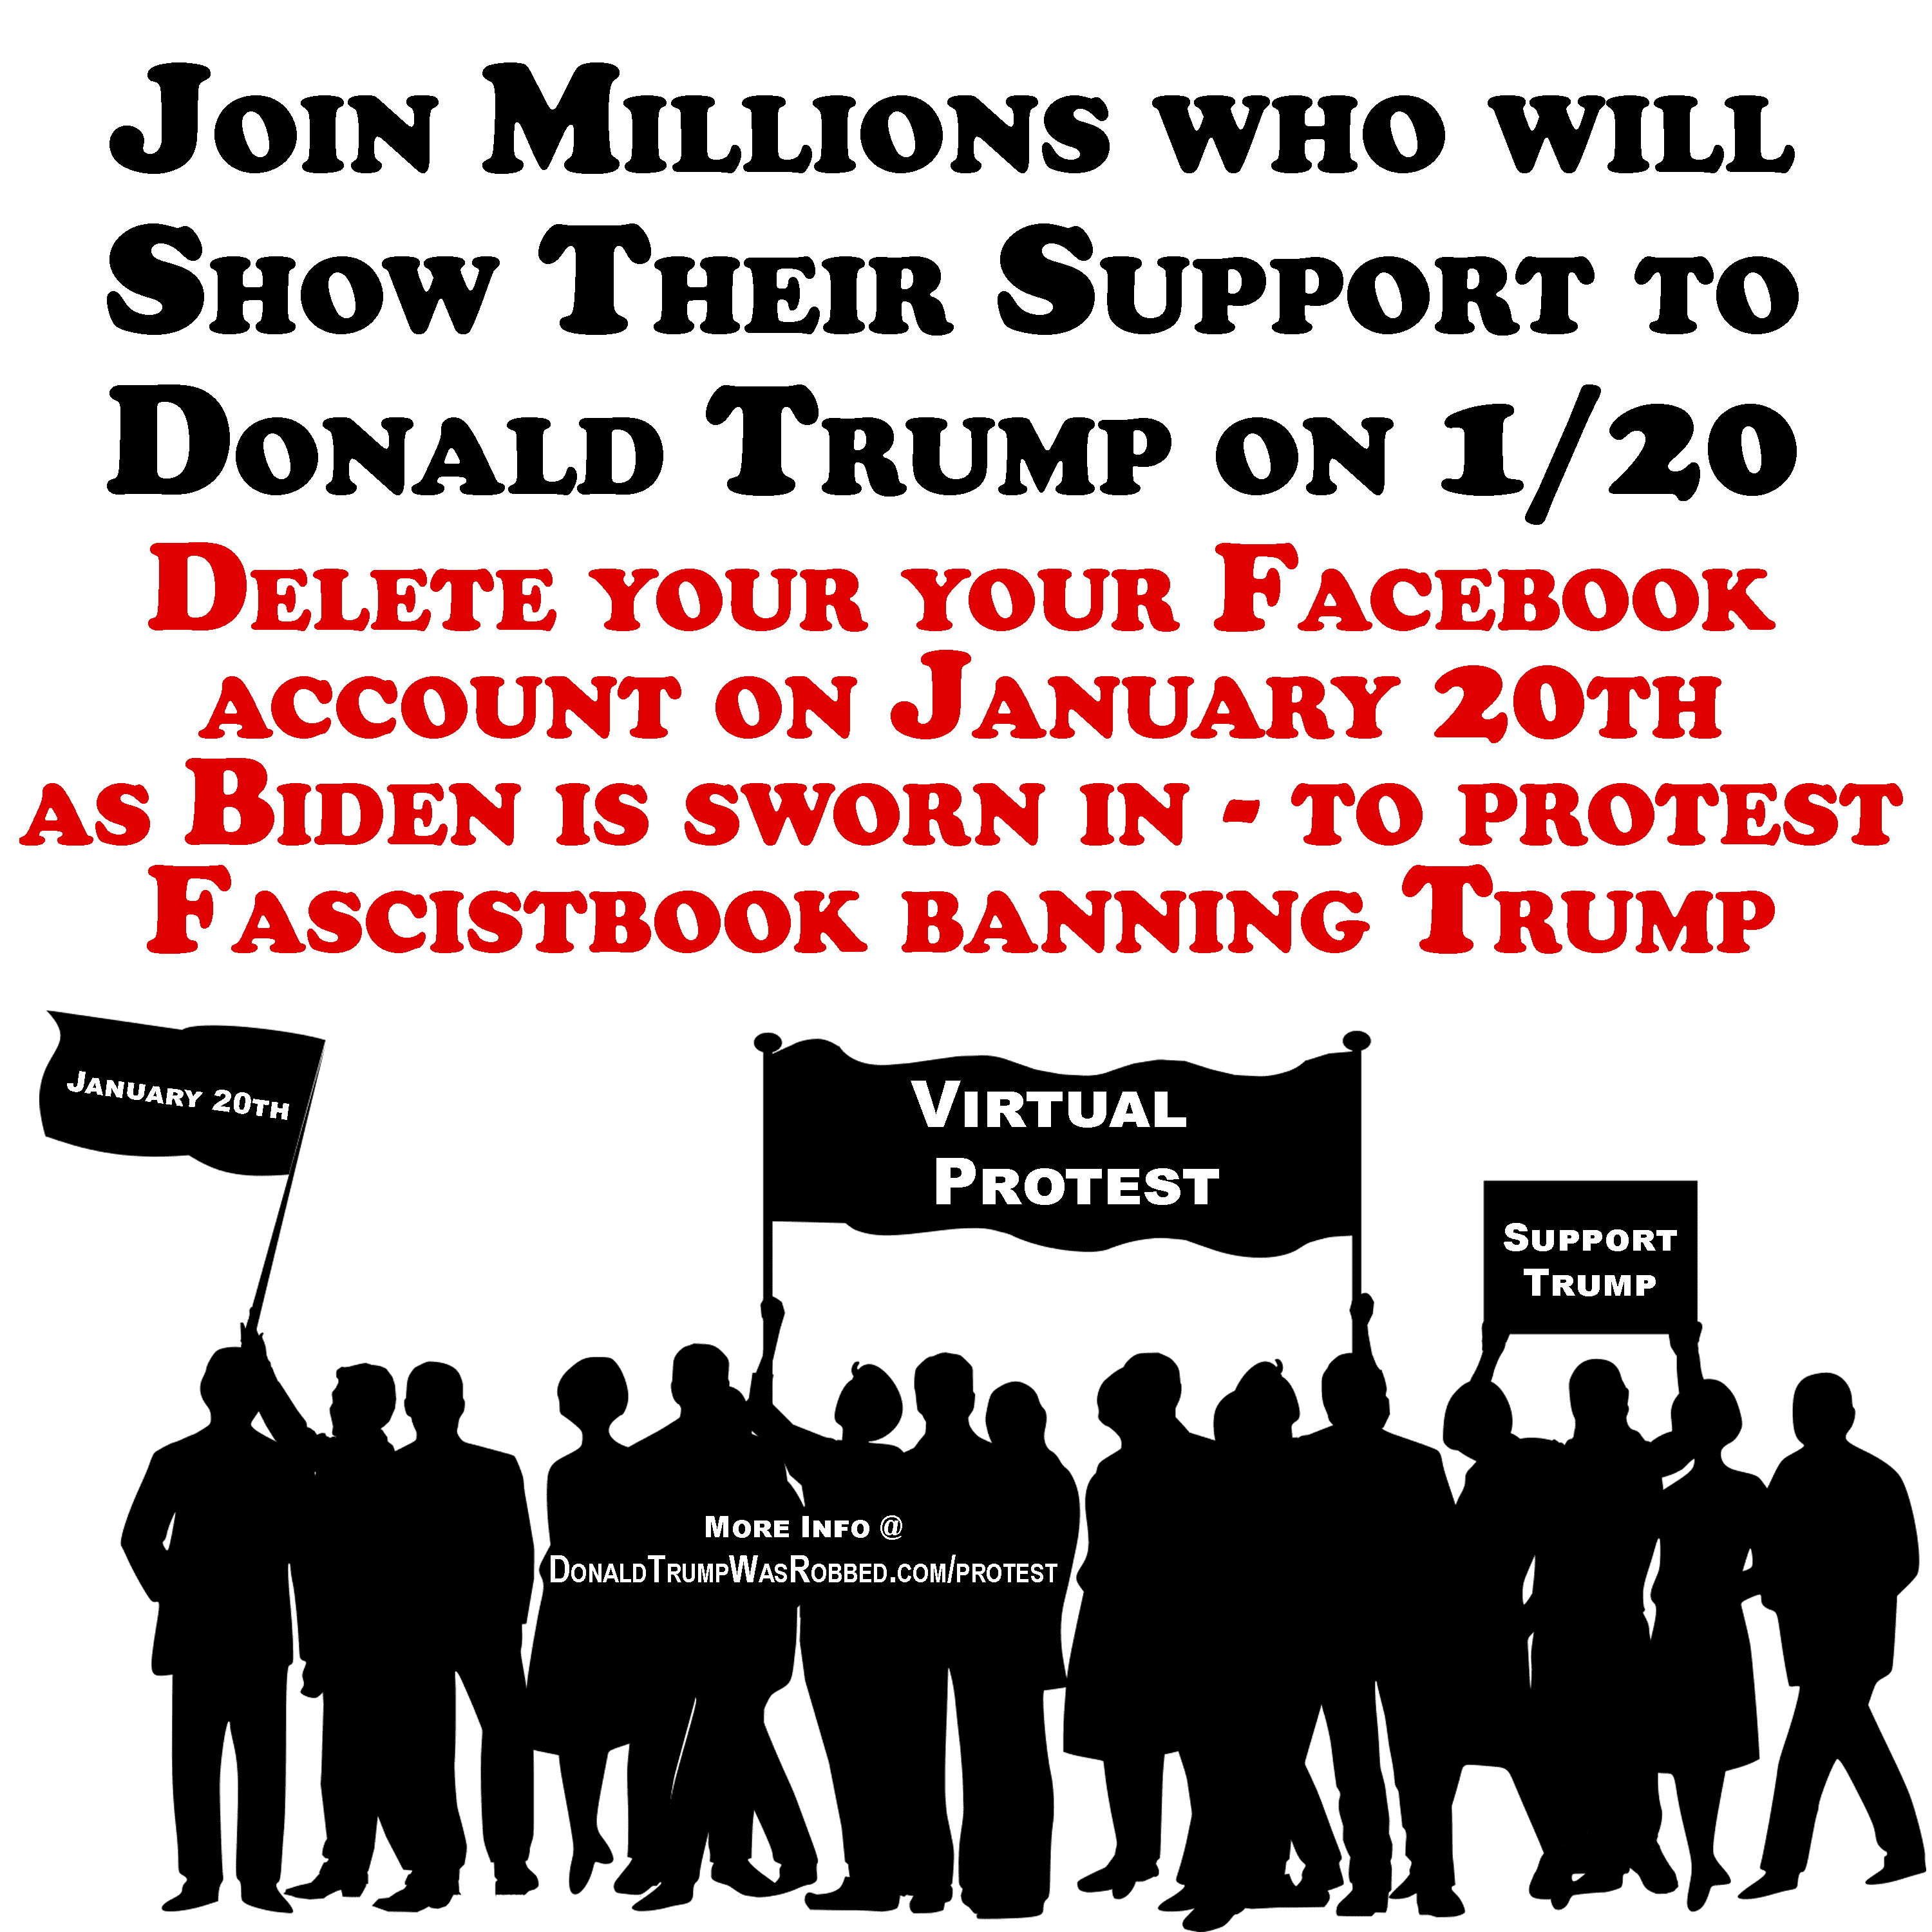 Six More Days Until Peaceful Protest in Support of Trump